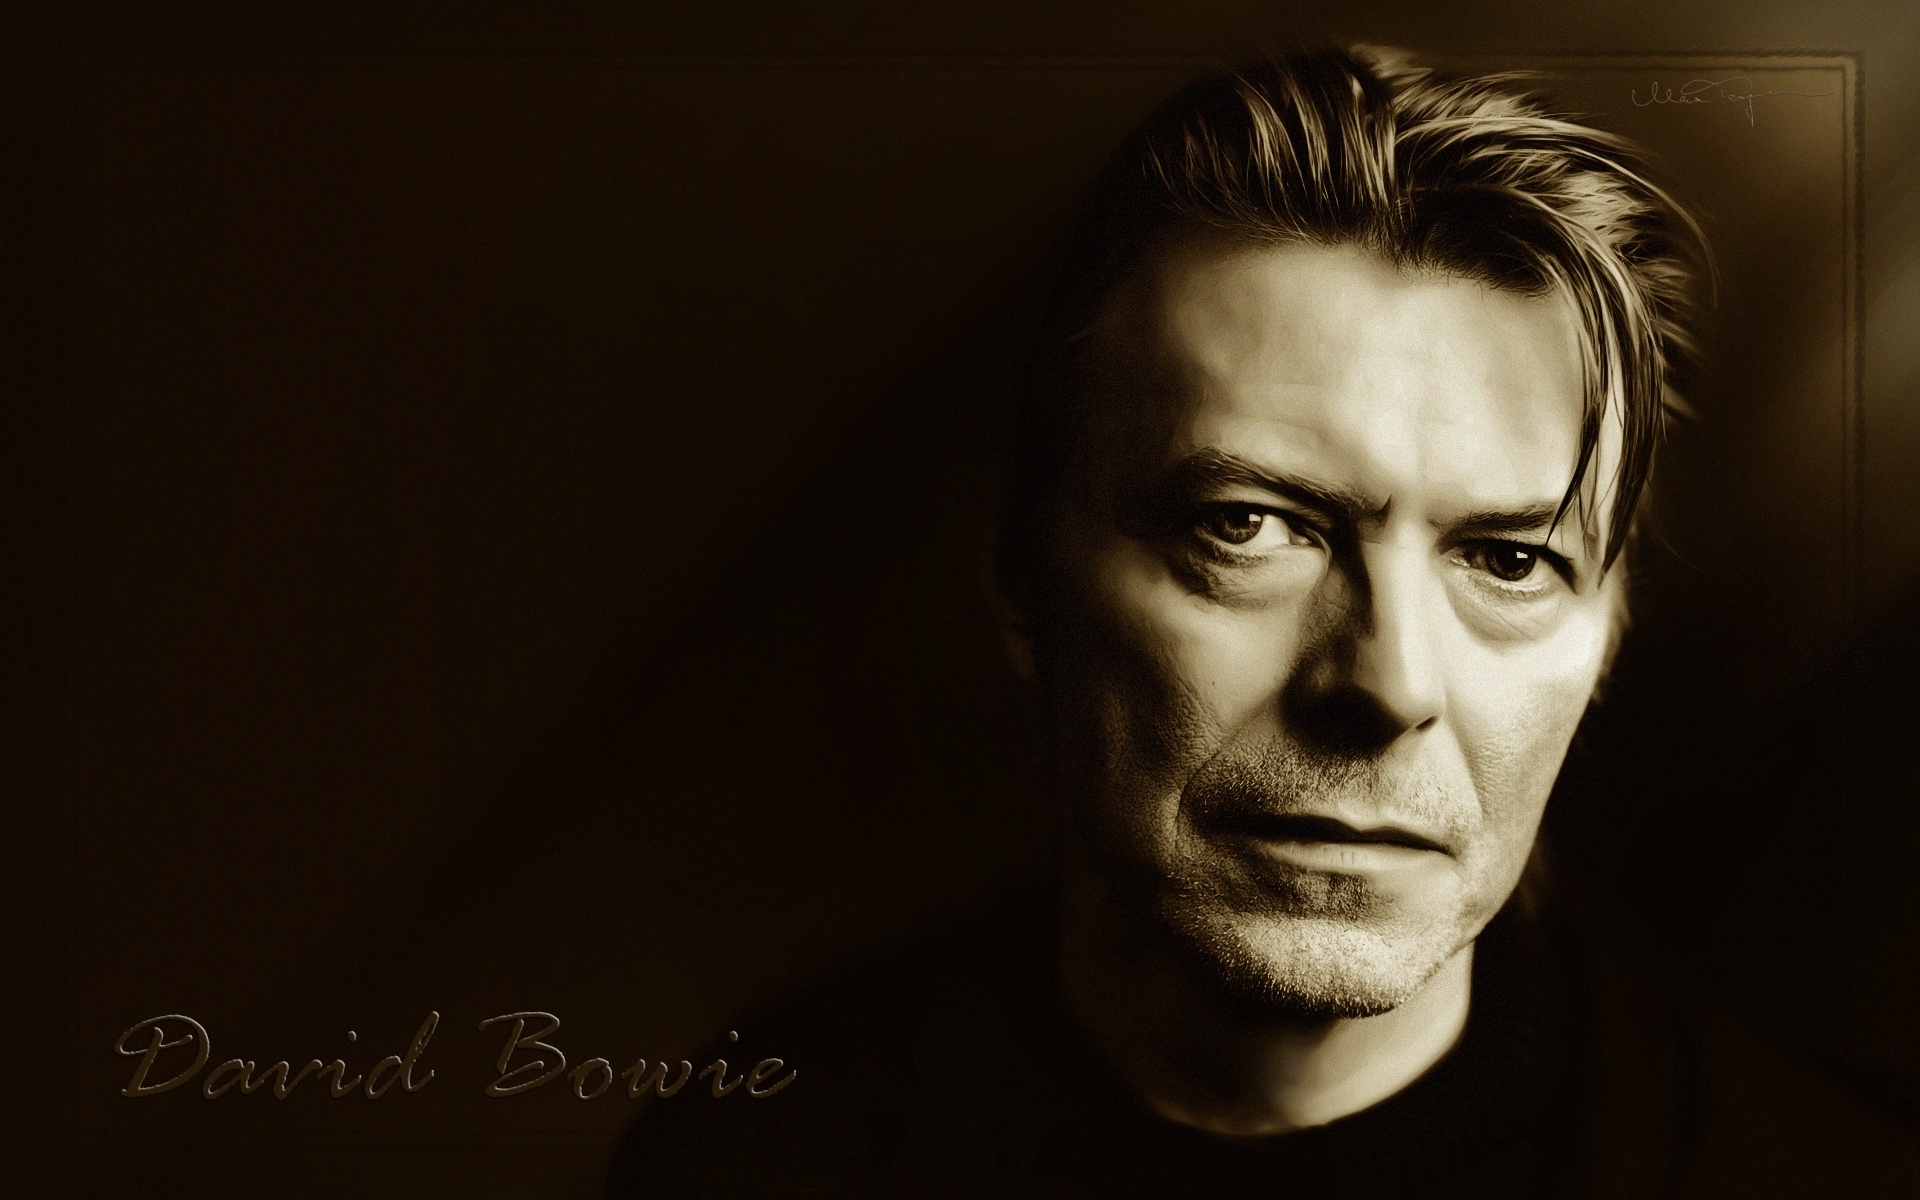 David Bowie Wallpaper High Resolution And Quality